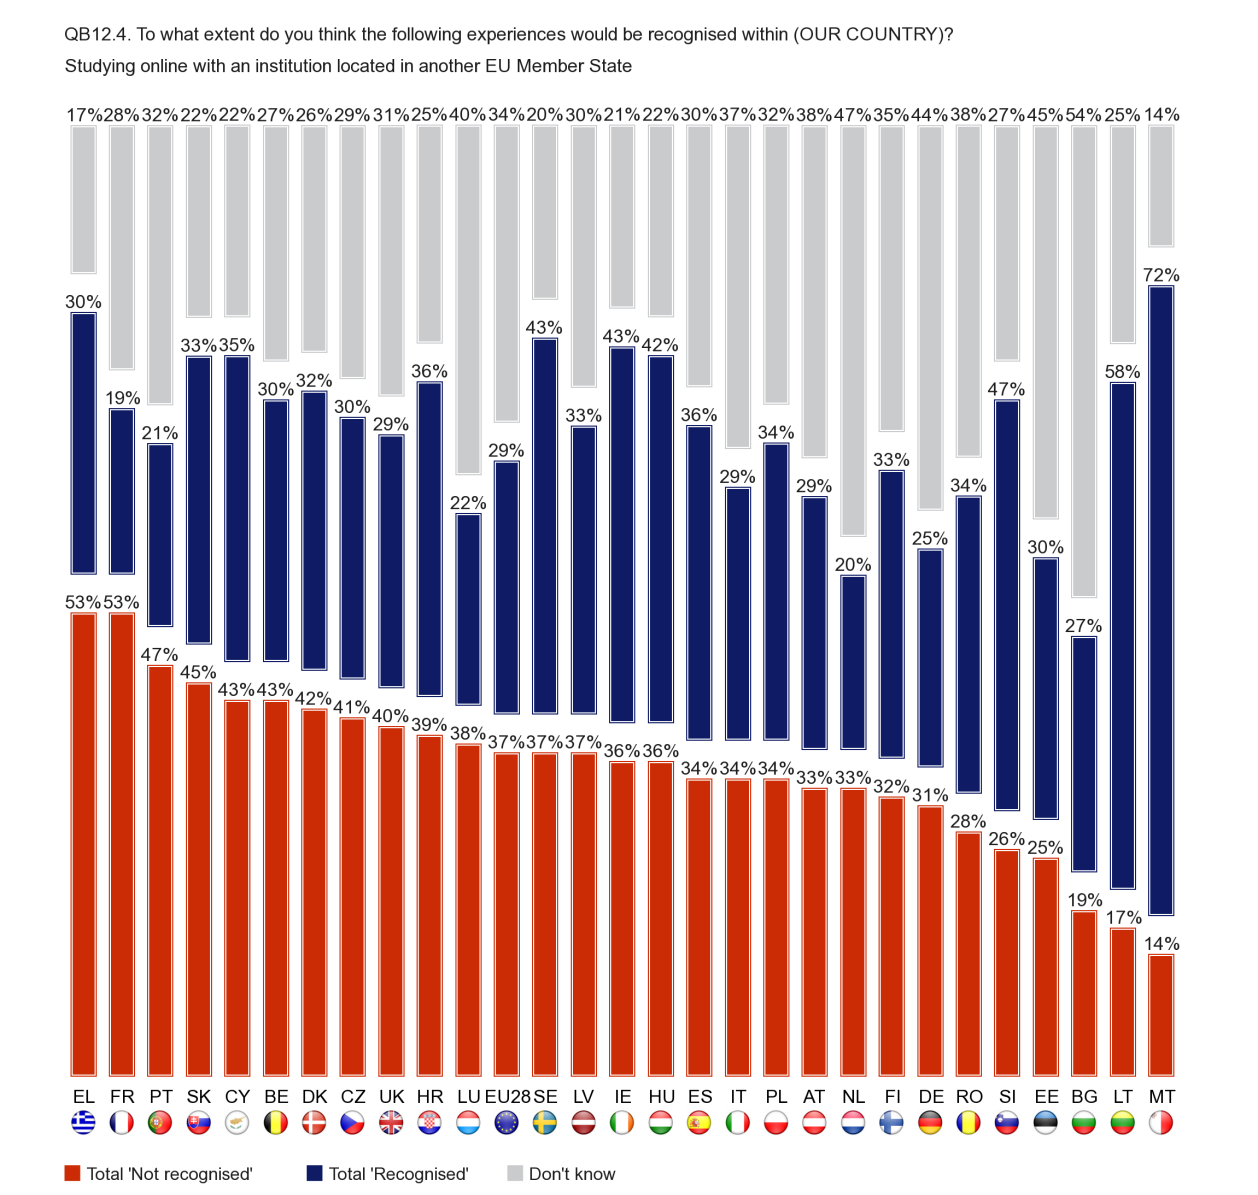 Malta has by far the highest proportion of respondents who say that studying online with an institution located in another EU Member State would be recognised in their own country (78% say this would